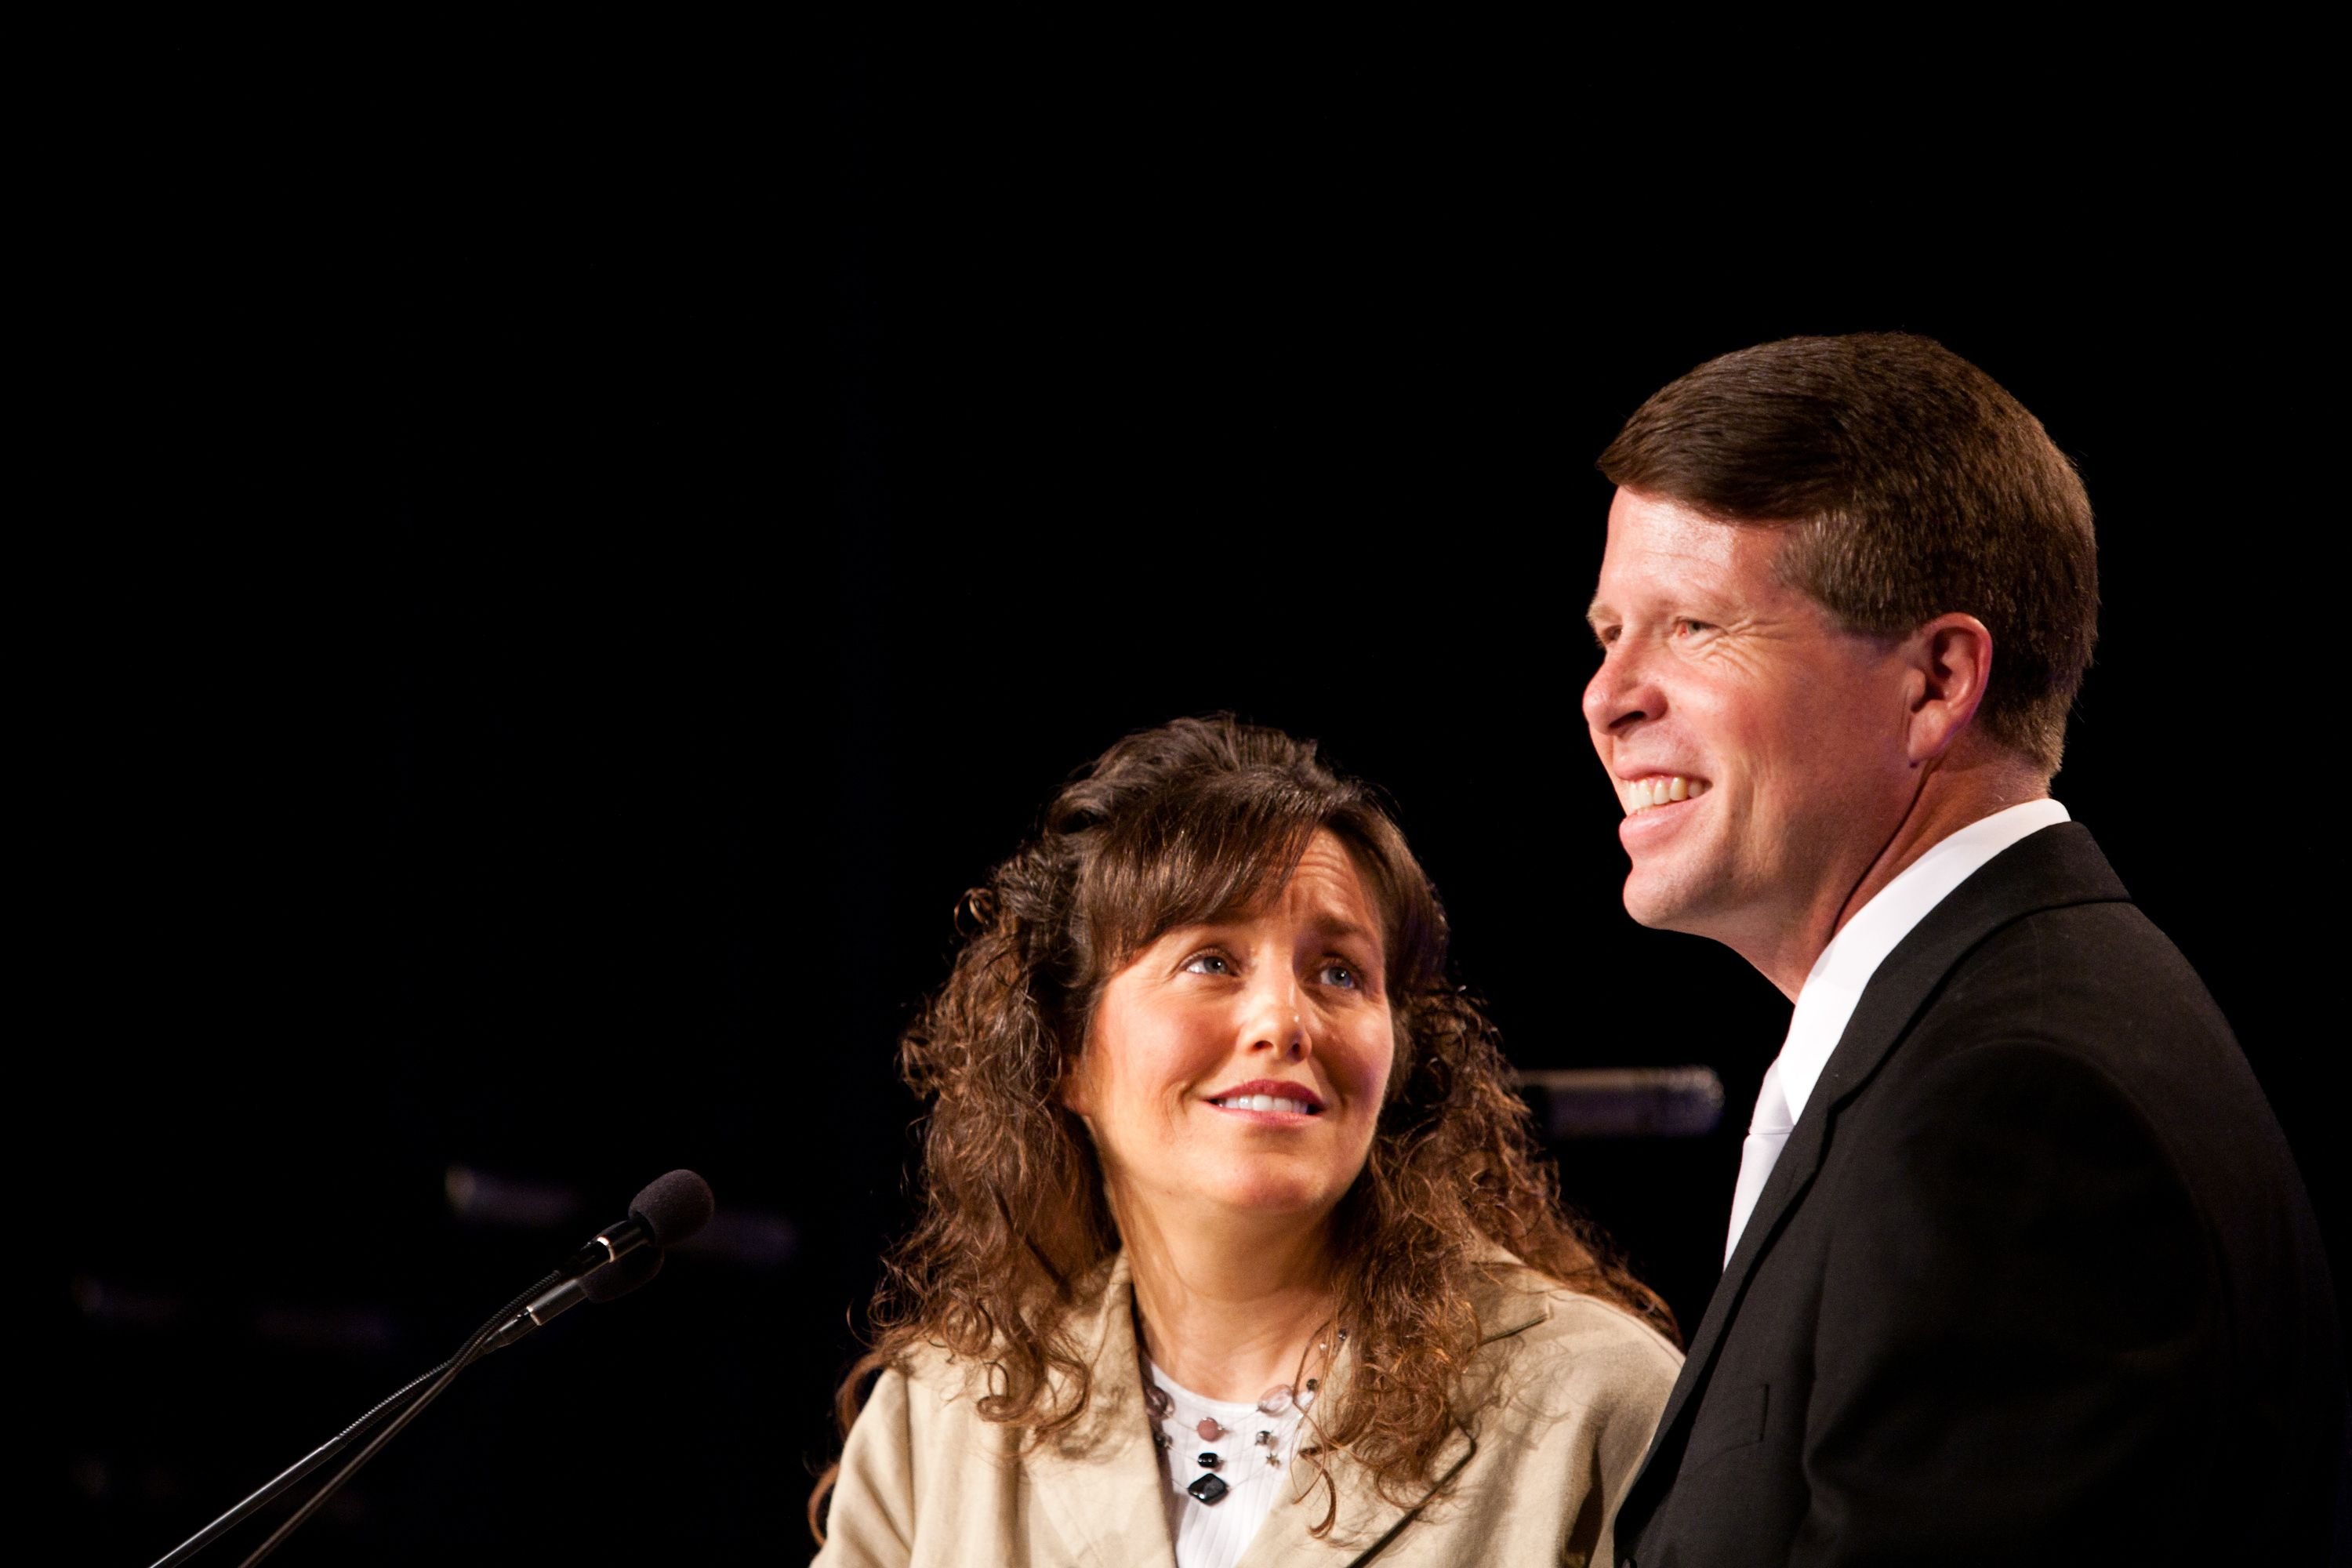 Michelle and Jim Bob Duggar speak at the Values Voter Summit on September 17, 2010, in Washington, DC. | Photo: Brendan Hoffman/Getty Images